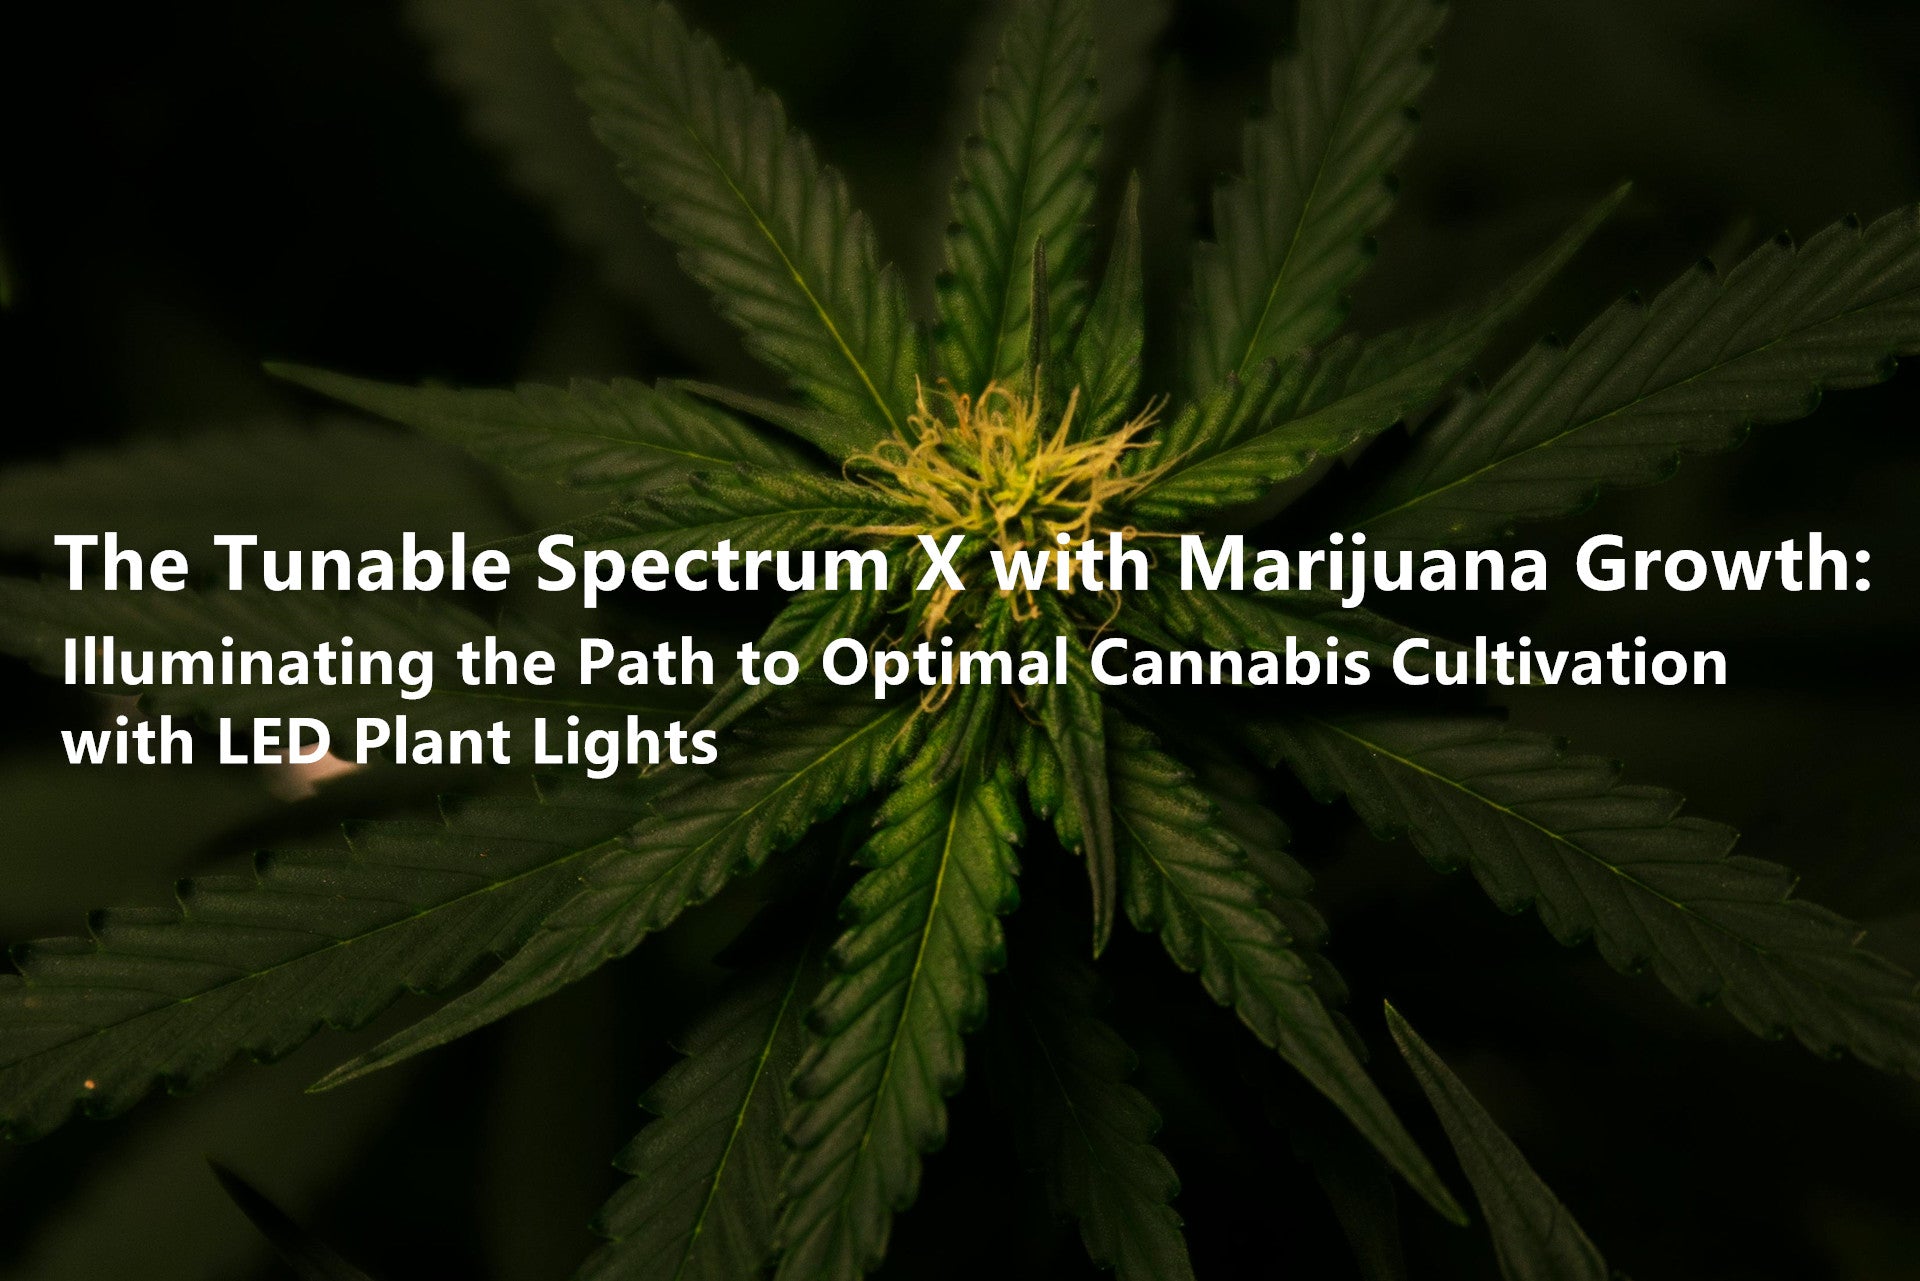 The Tunable Spectrum X with Marijuana Growth: Illuminating the Path to Optimal Cannabis Cultivation with LED Plant Lights